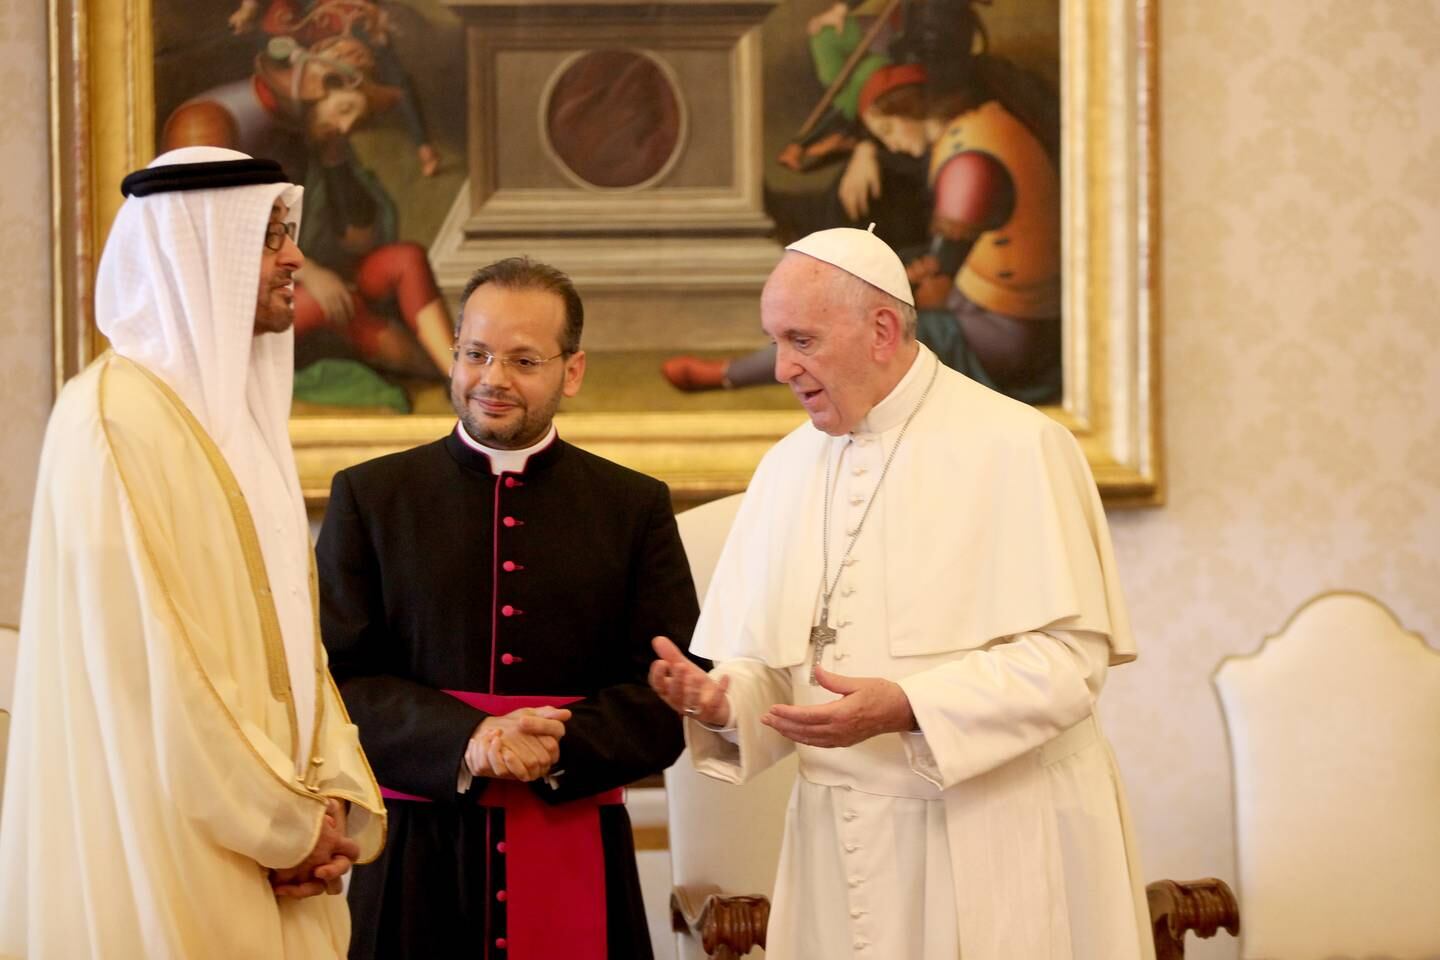 VATICAN CITY, VATICAN - SEPTEMBER 15:  Pope Francis meets Sheikh Mohamed bin Zayed Al Nahyan, Crown Prince of Abu Dhabi and Deputy Supreme Commander of the UAE Armed Forces, at the Apostolic Palace on September 15, 2016 in Vatican City, Vatican.  Sheikh Mohamed and Pope Francis  discussed bilateral ties between the UAE and the Vatican and ways of developing them, as well as review joint cooperation efforts in promoting tolerance, dialogue and coexistence, values held by all religions, as part of efforts to achieve security, peace and stability in the region and the world.  (Photo by Franco Origlia/Getty Images)